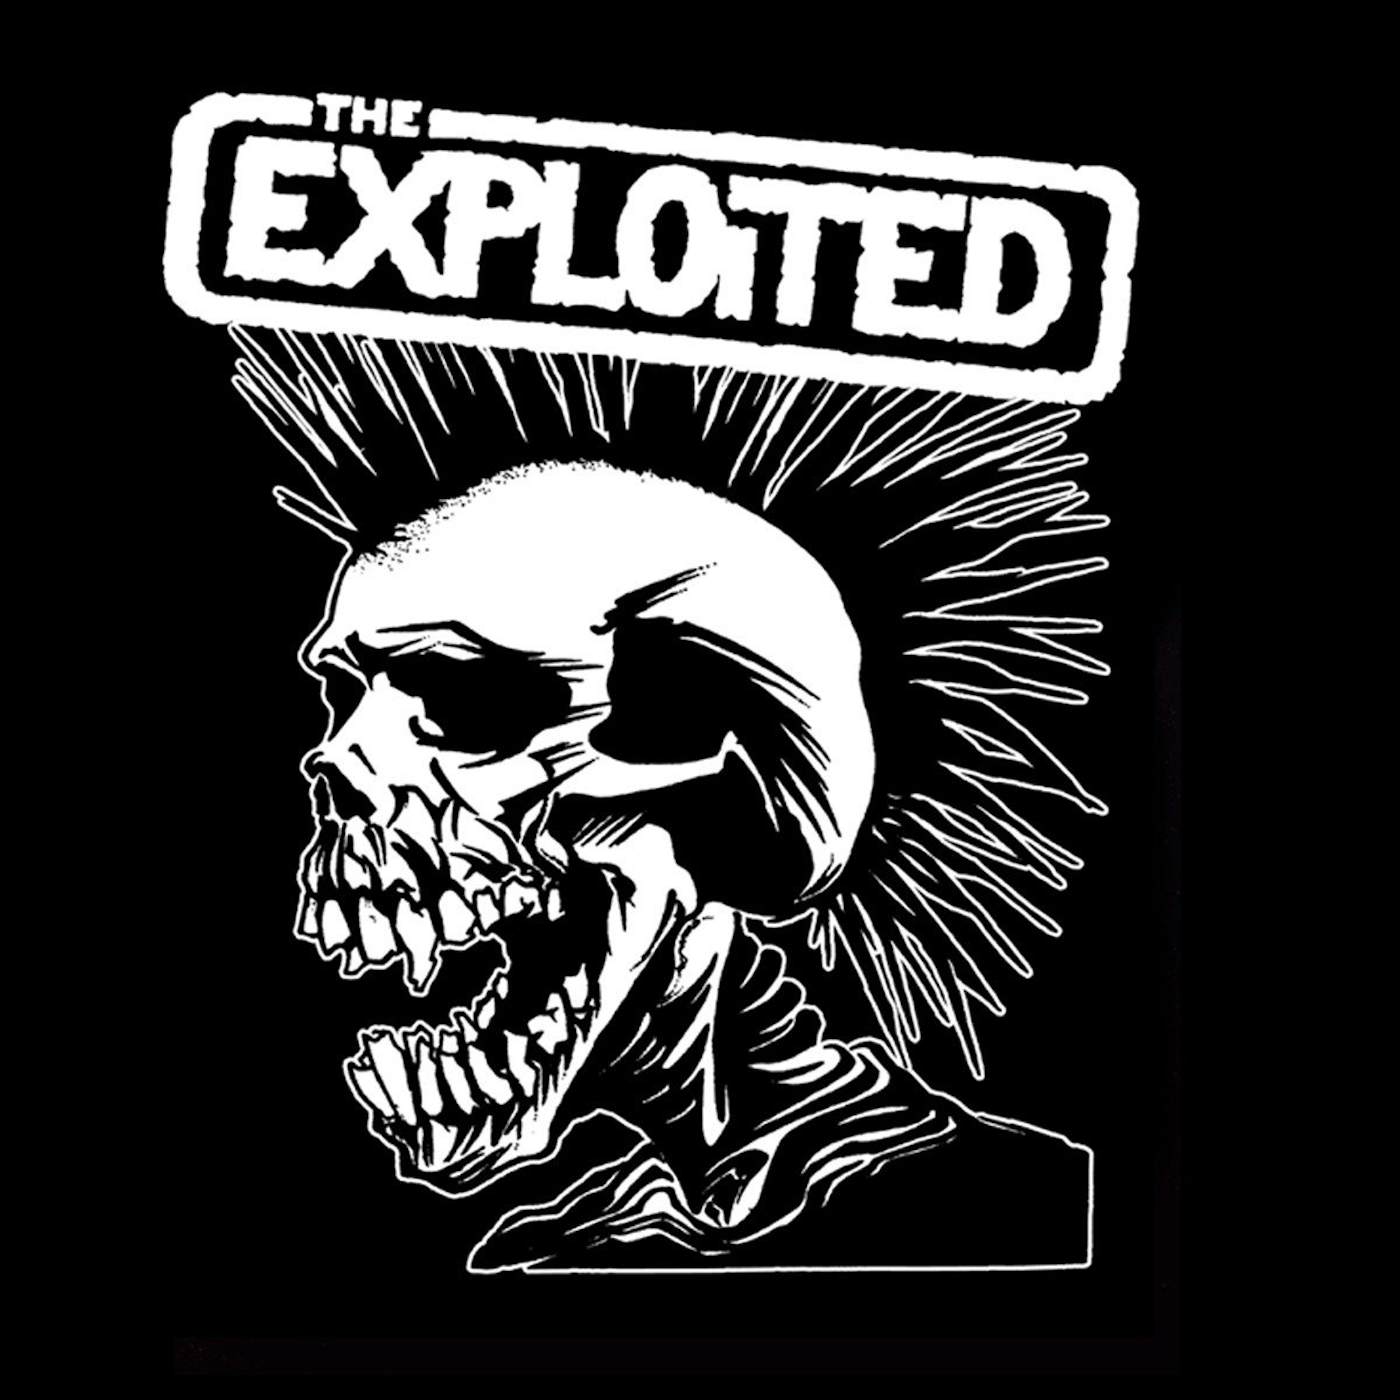 The Exploited "Pushead Skull" Back Patch